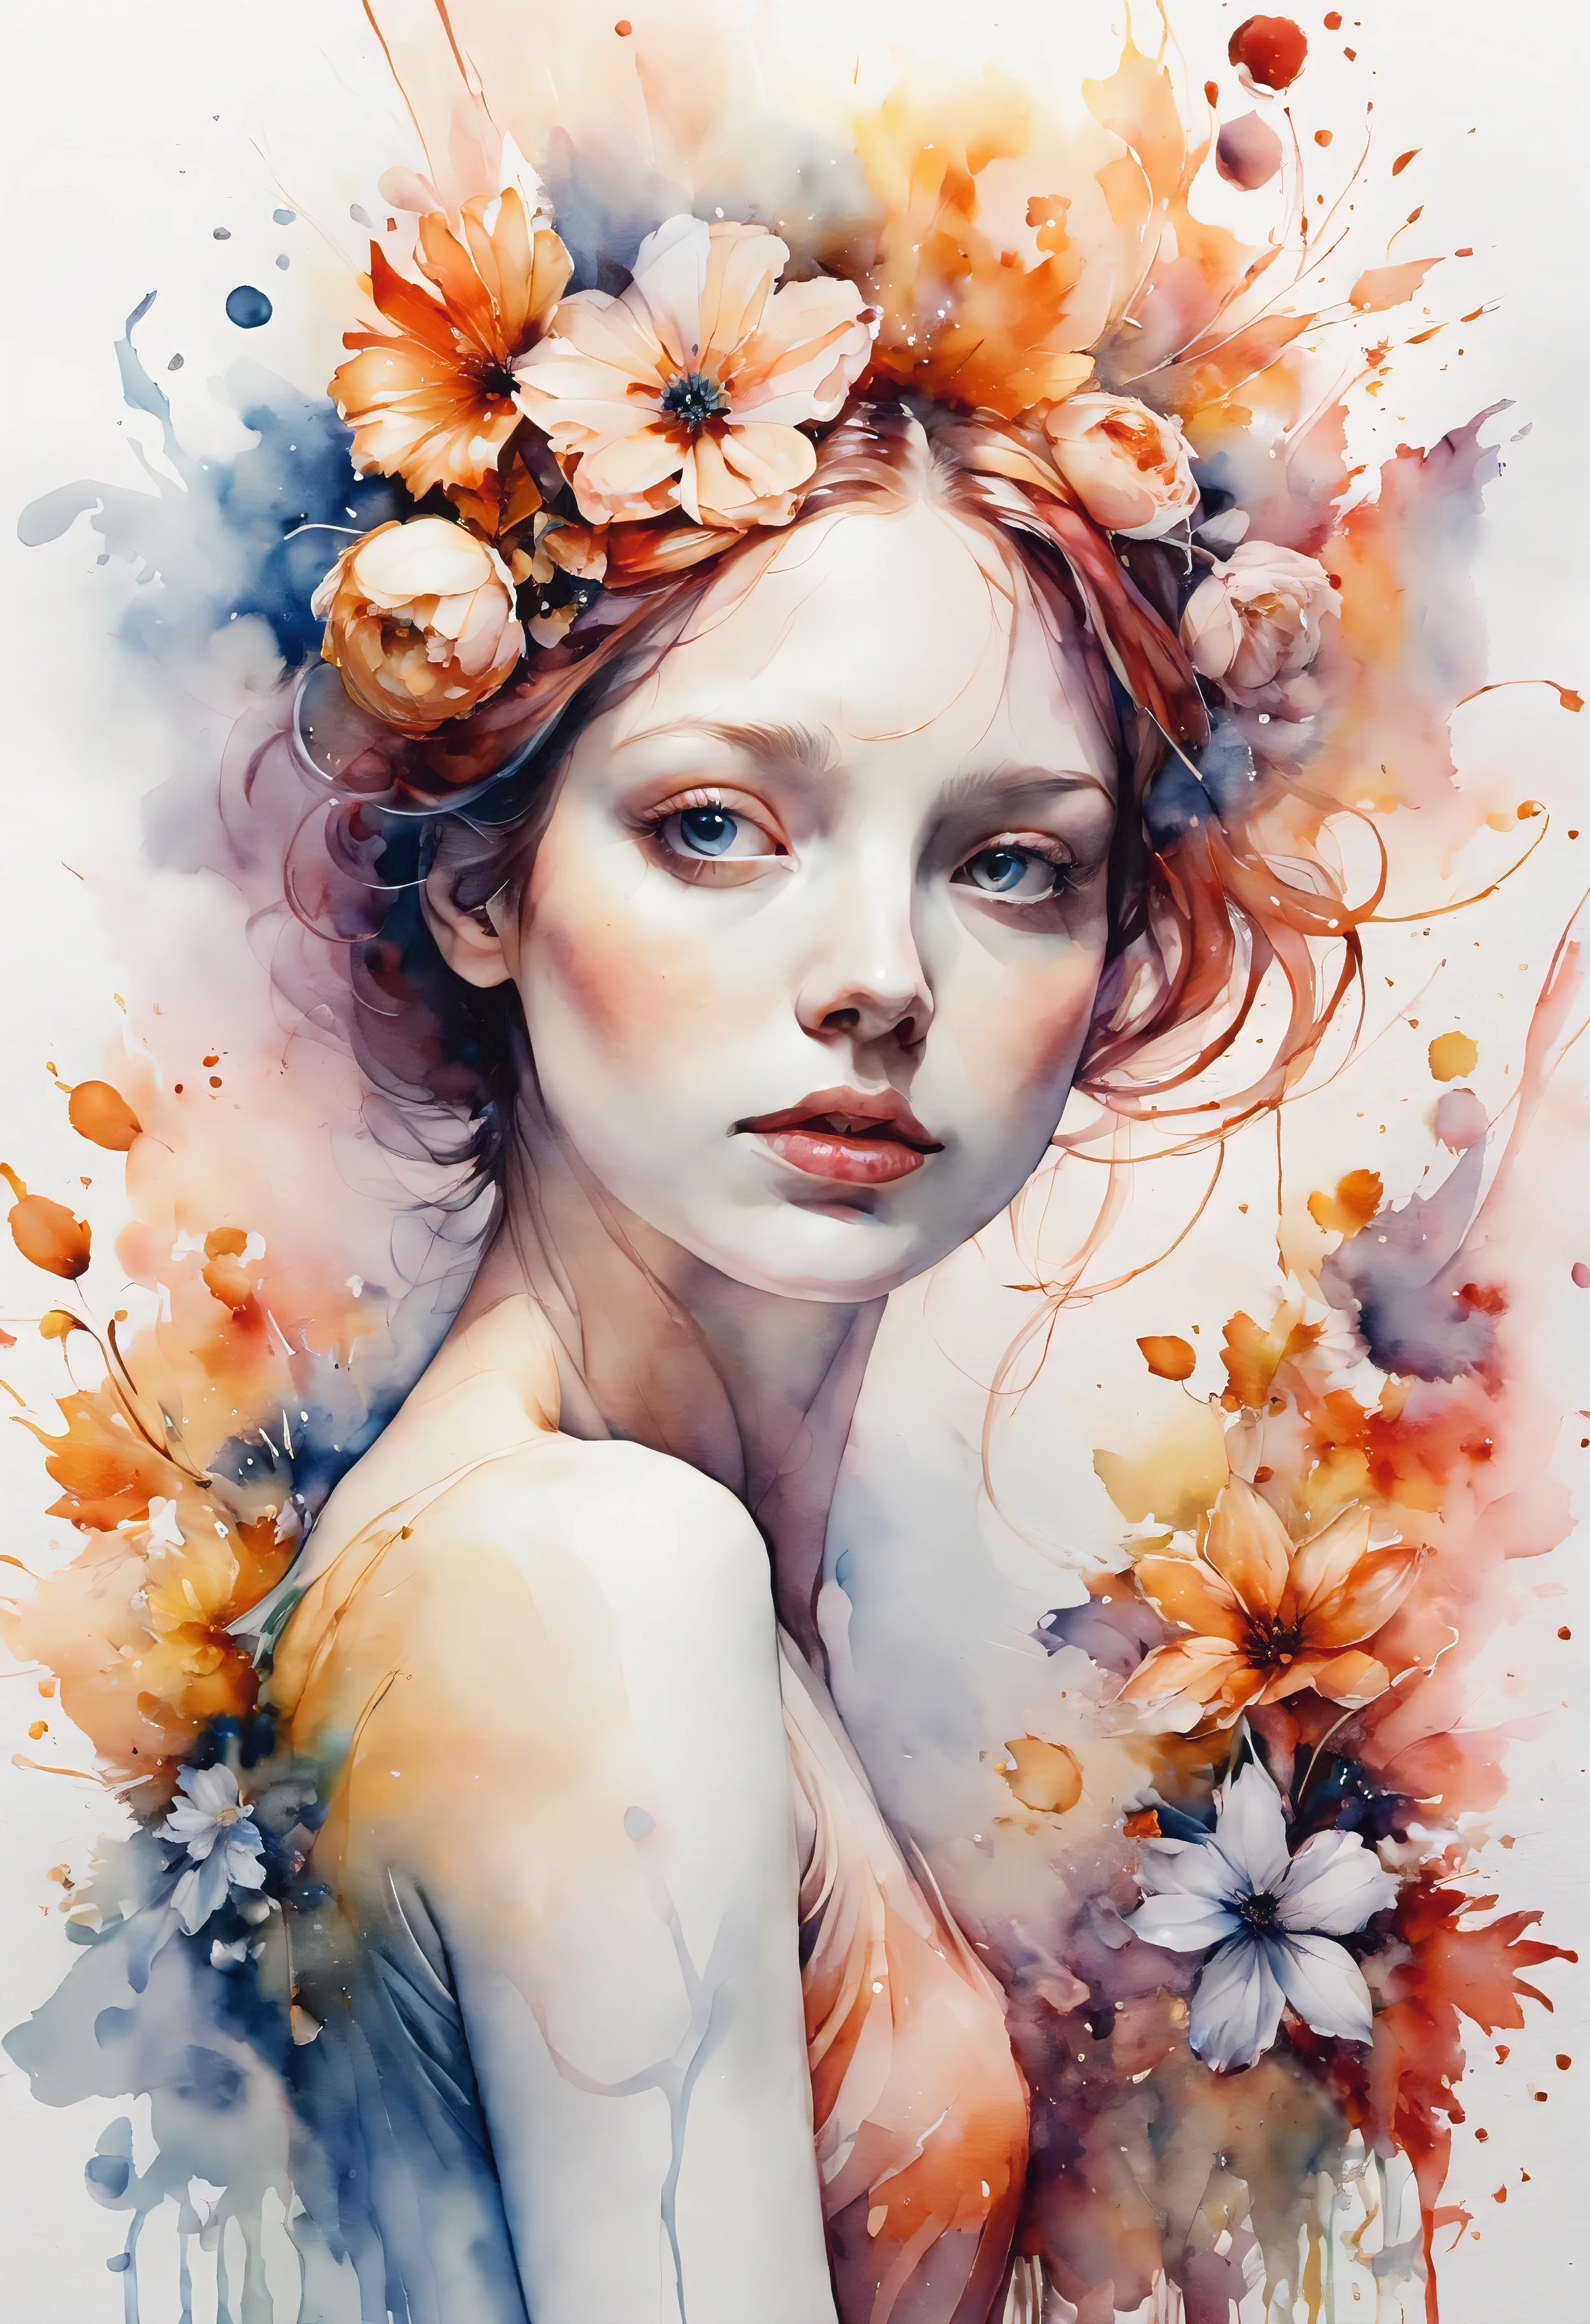 (((watercolor:1.5))), ((watercolor painting):1.4), ((a painting of woman by Agnes Cecile):1.3), ((Flowers):1.4), ((luminious design):1.3), ((autumn lights):1.1), Gouache with intricate details, pastel color, ink drips, Detailed brushstrokes have been enhanced, Careful brushwork creates an atmosphere, Utilize delicate yet powerful brushstroke techniques, Create an enchanting atmosphere. highly detailed gouache, ((Unparalleled sharpness and clarity):1.1), ((Radiosity rendered in stunning 32K resolution):1.3), All captured with sharp focus.